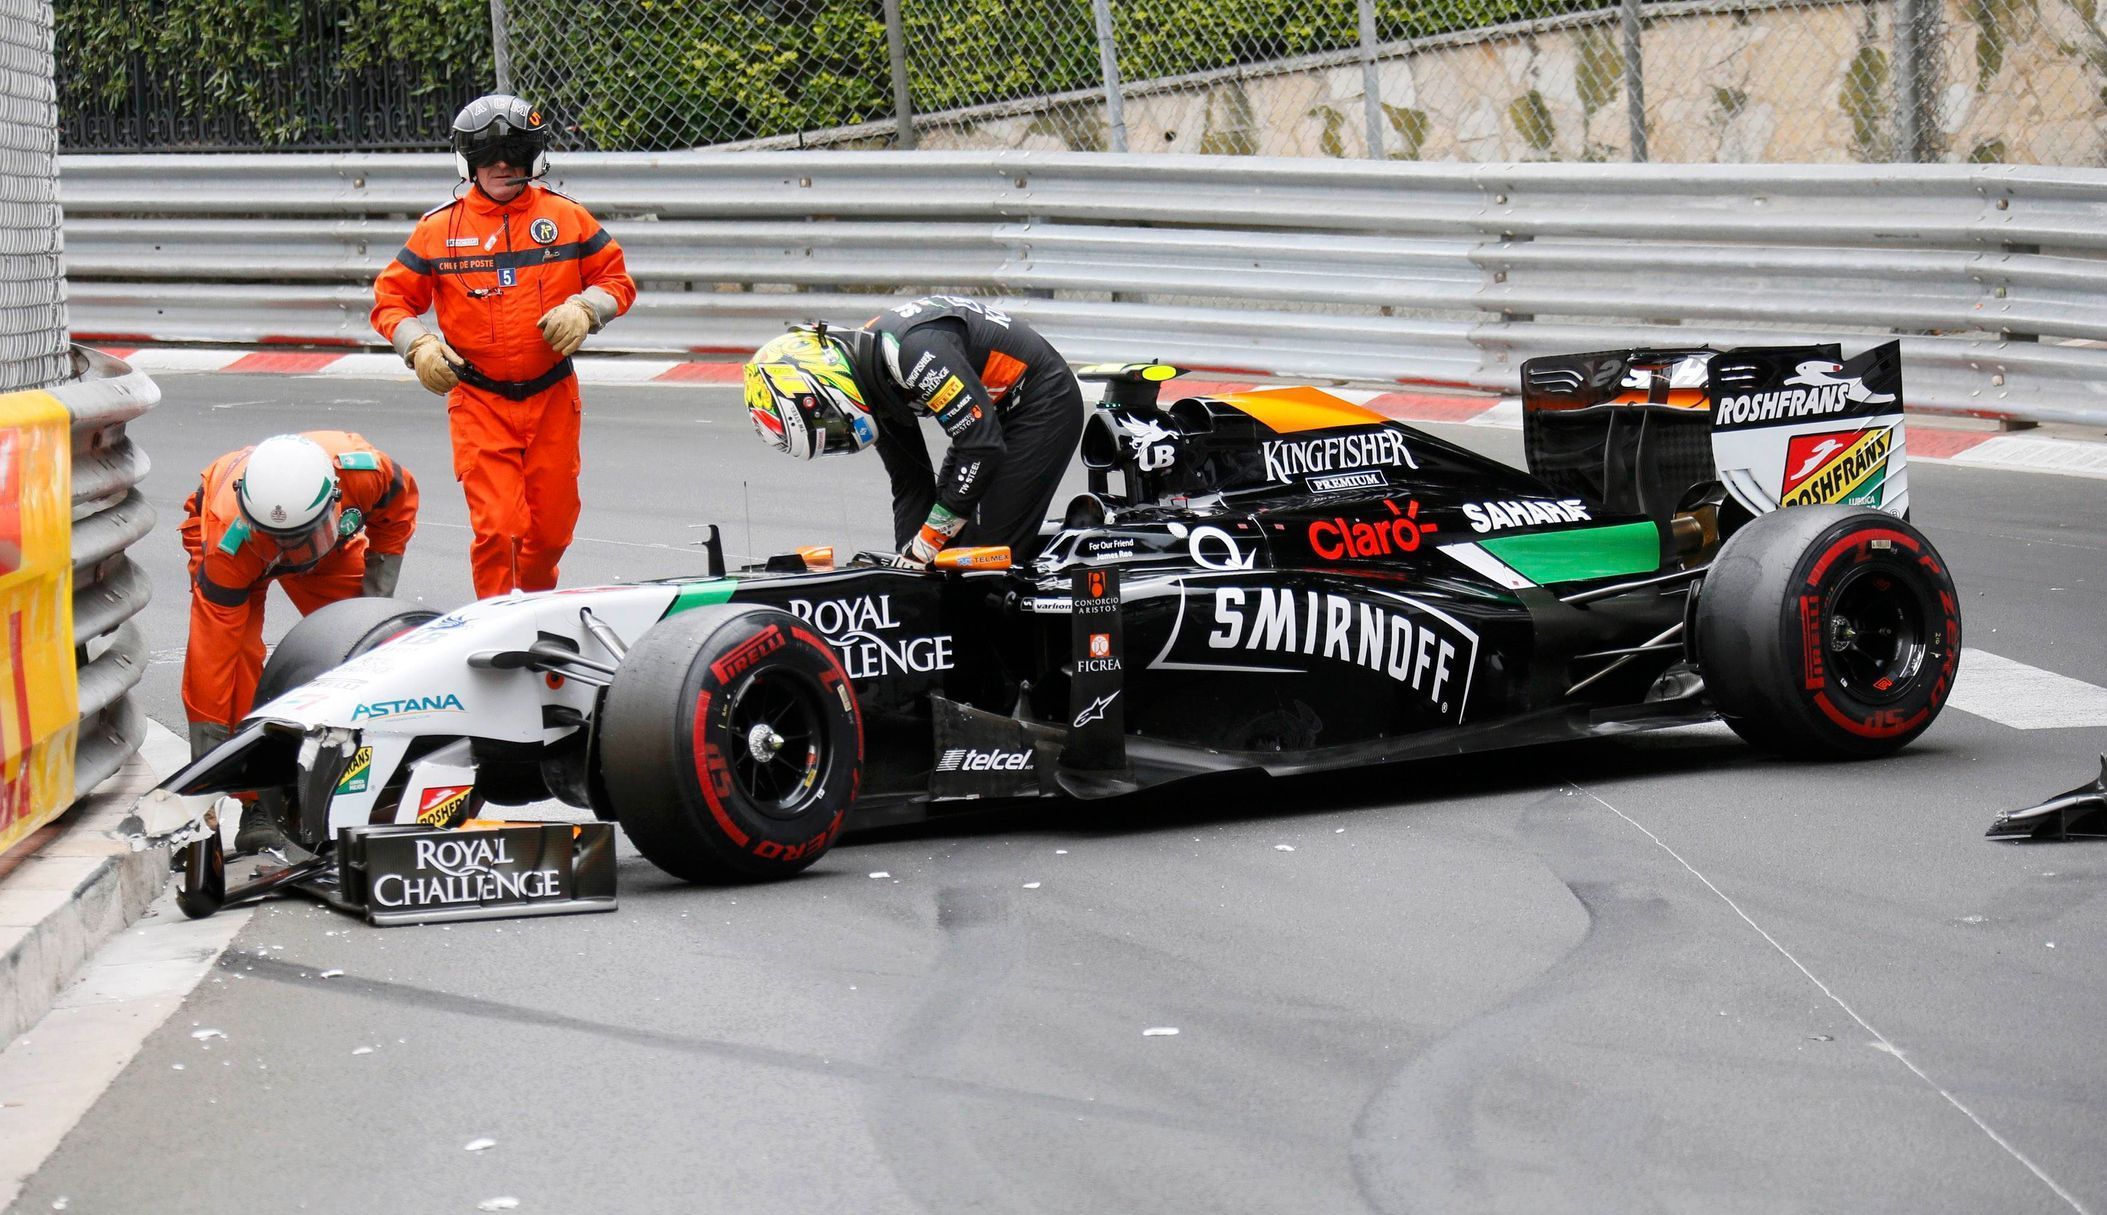 Force India Formula One driver Sergio Perez leaves his car after crashing at the start of the Monaco F1 Grand Prix in Monaco